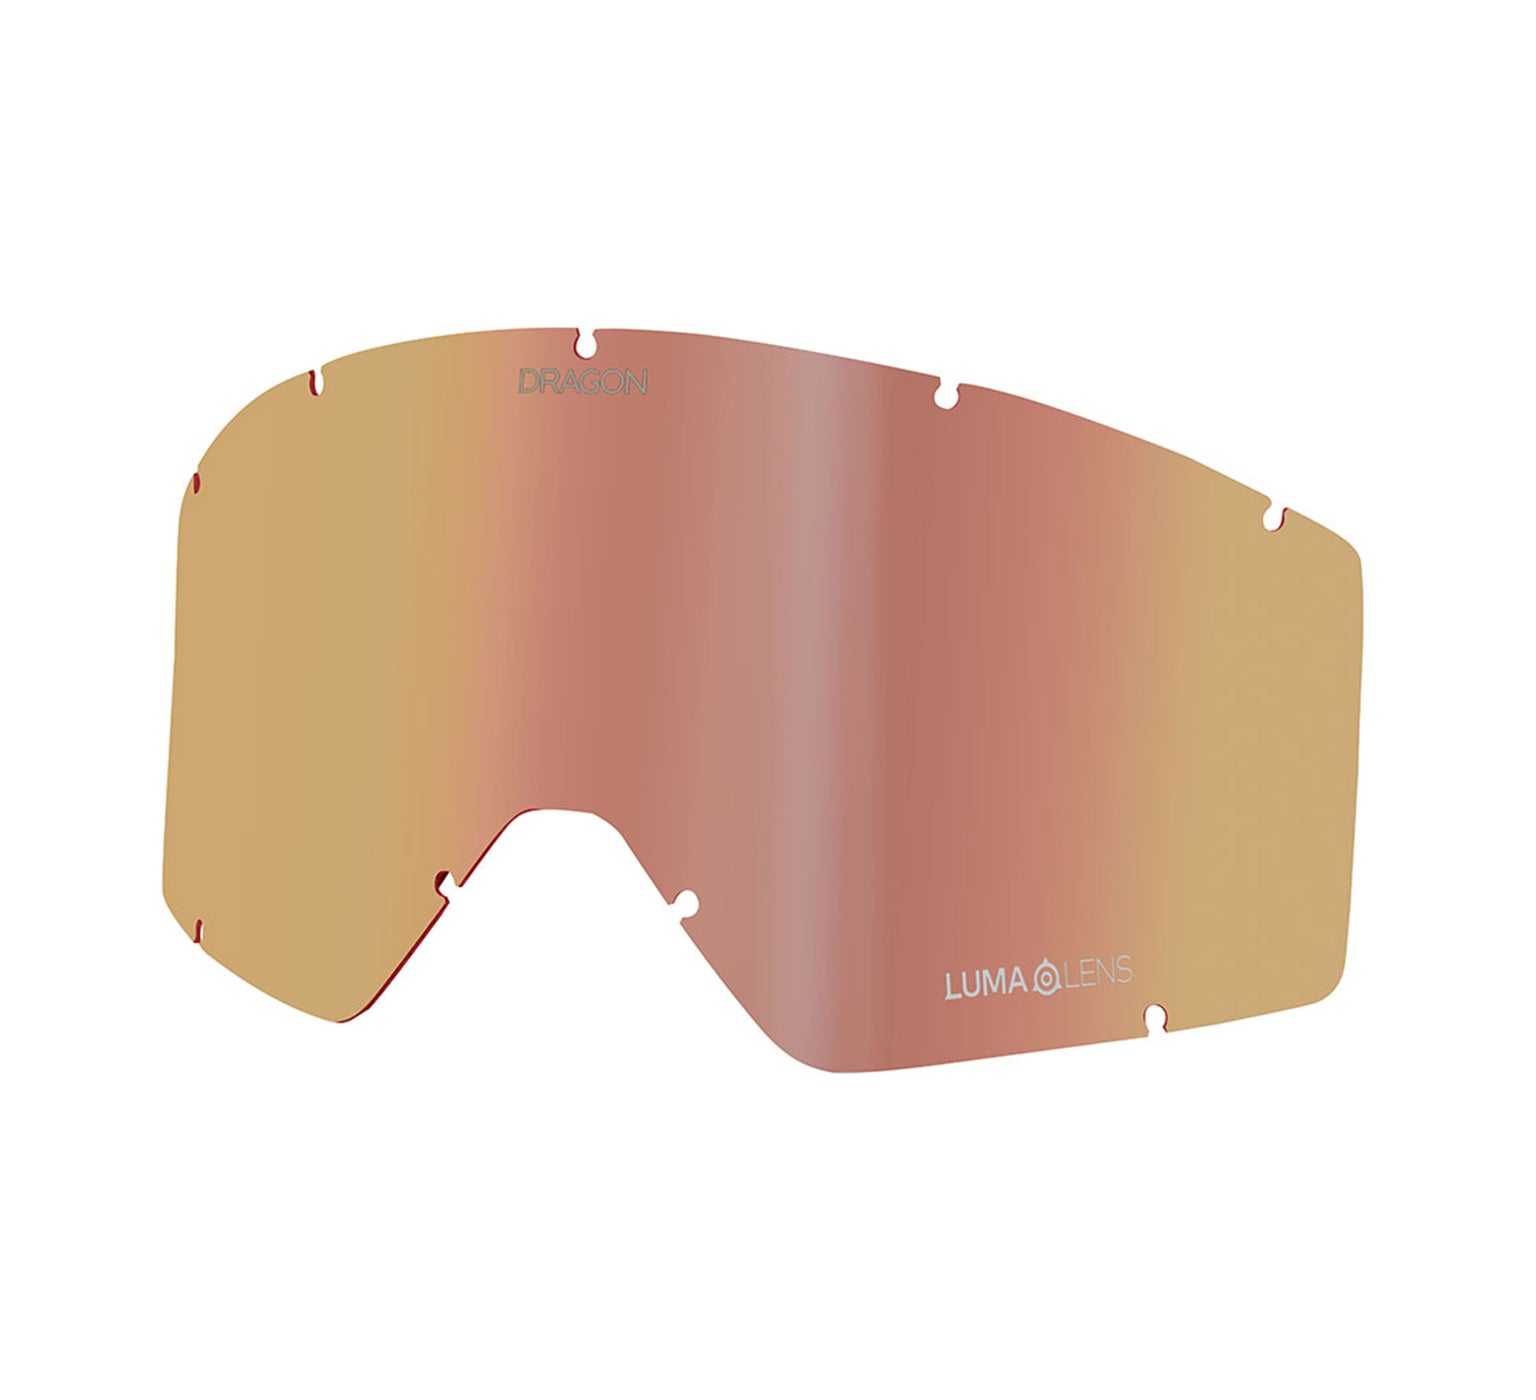 DXT OTG Replacement Lens - Lumalens Rose Gold Ionized